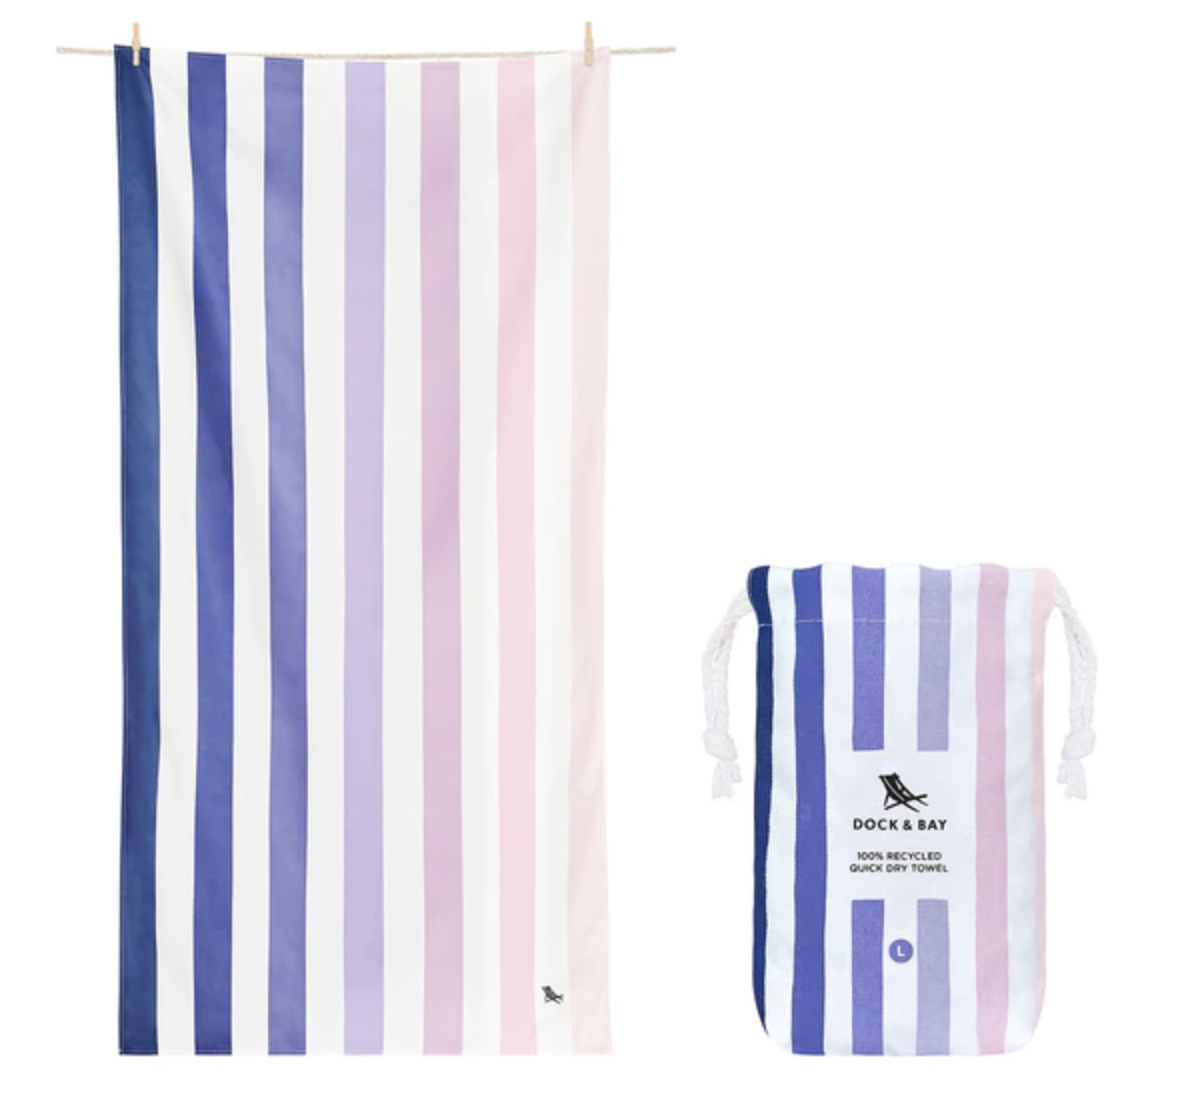 dock & bay Summer Dusk to Dawn Quick Dry Towel